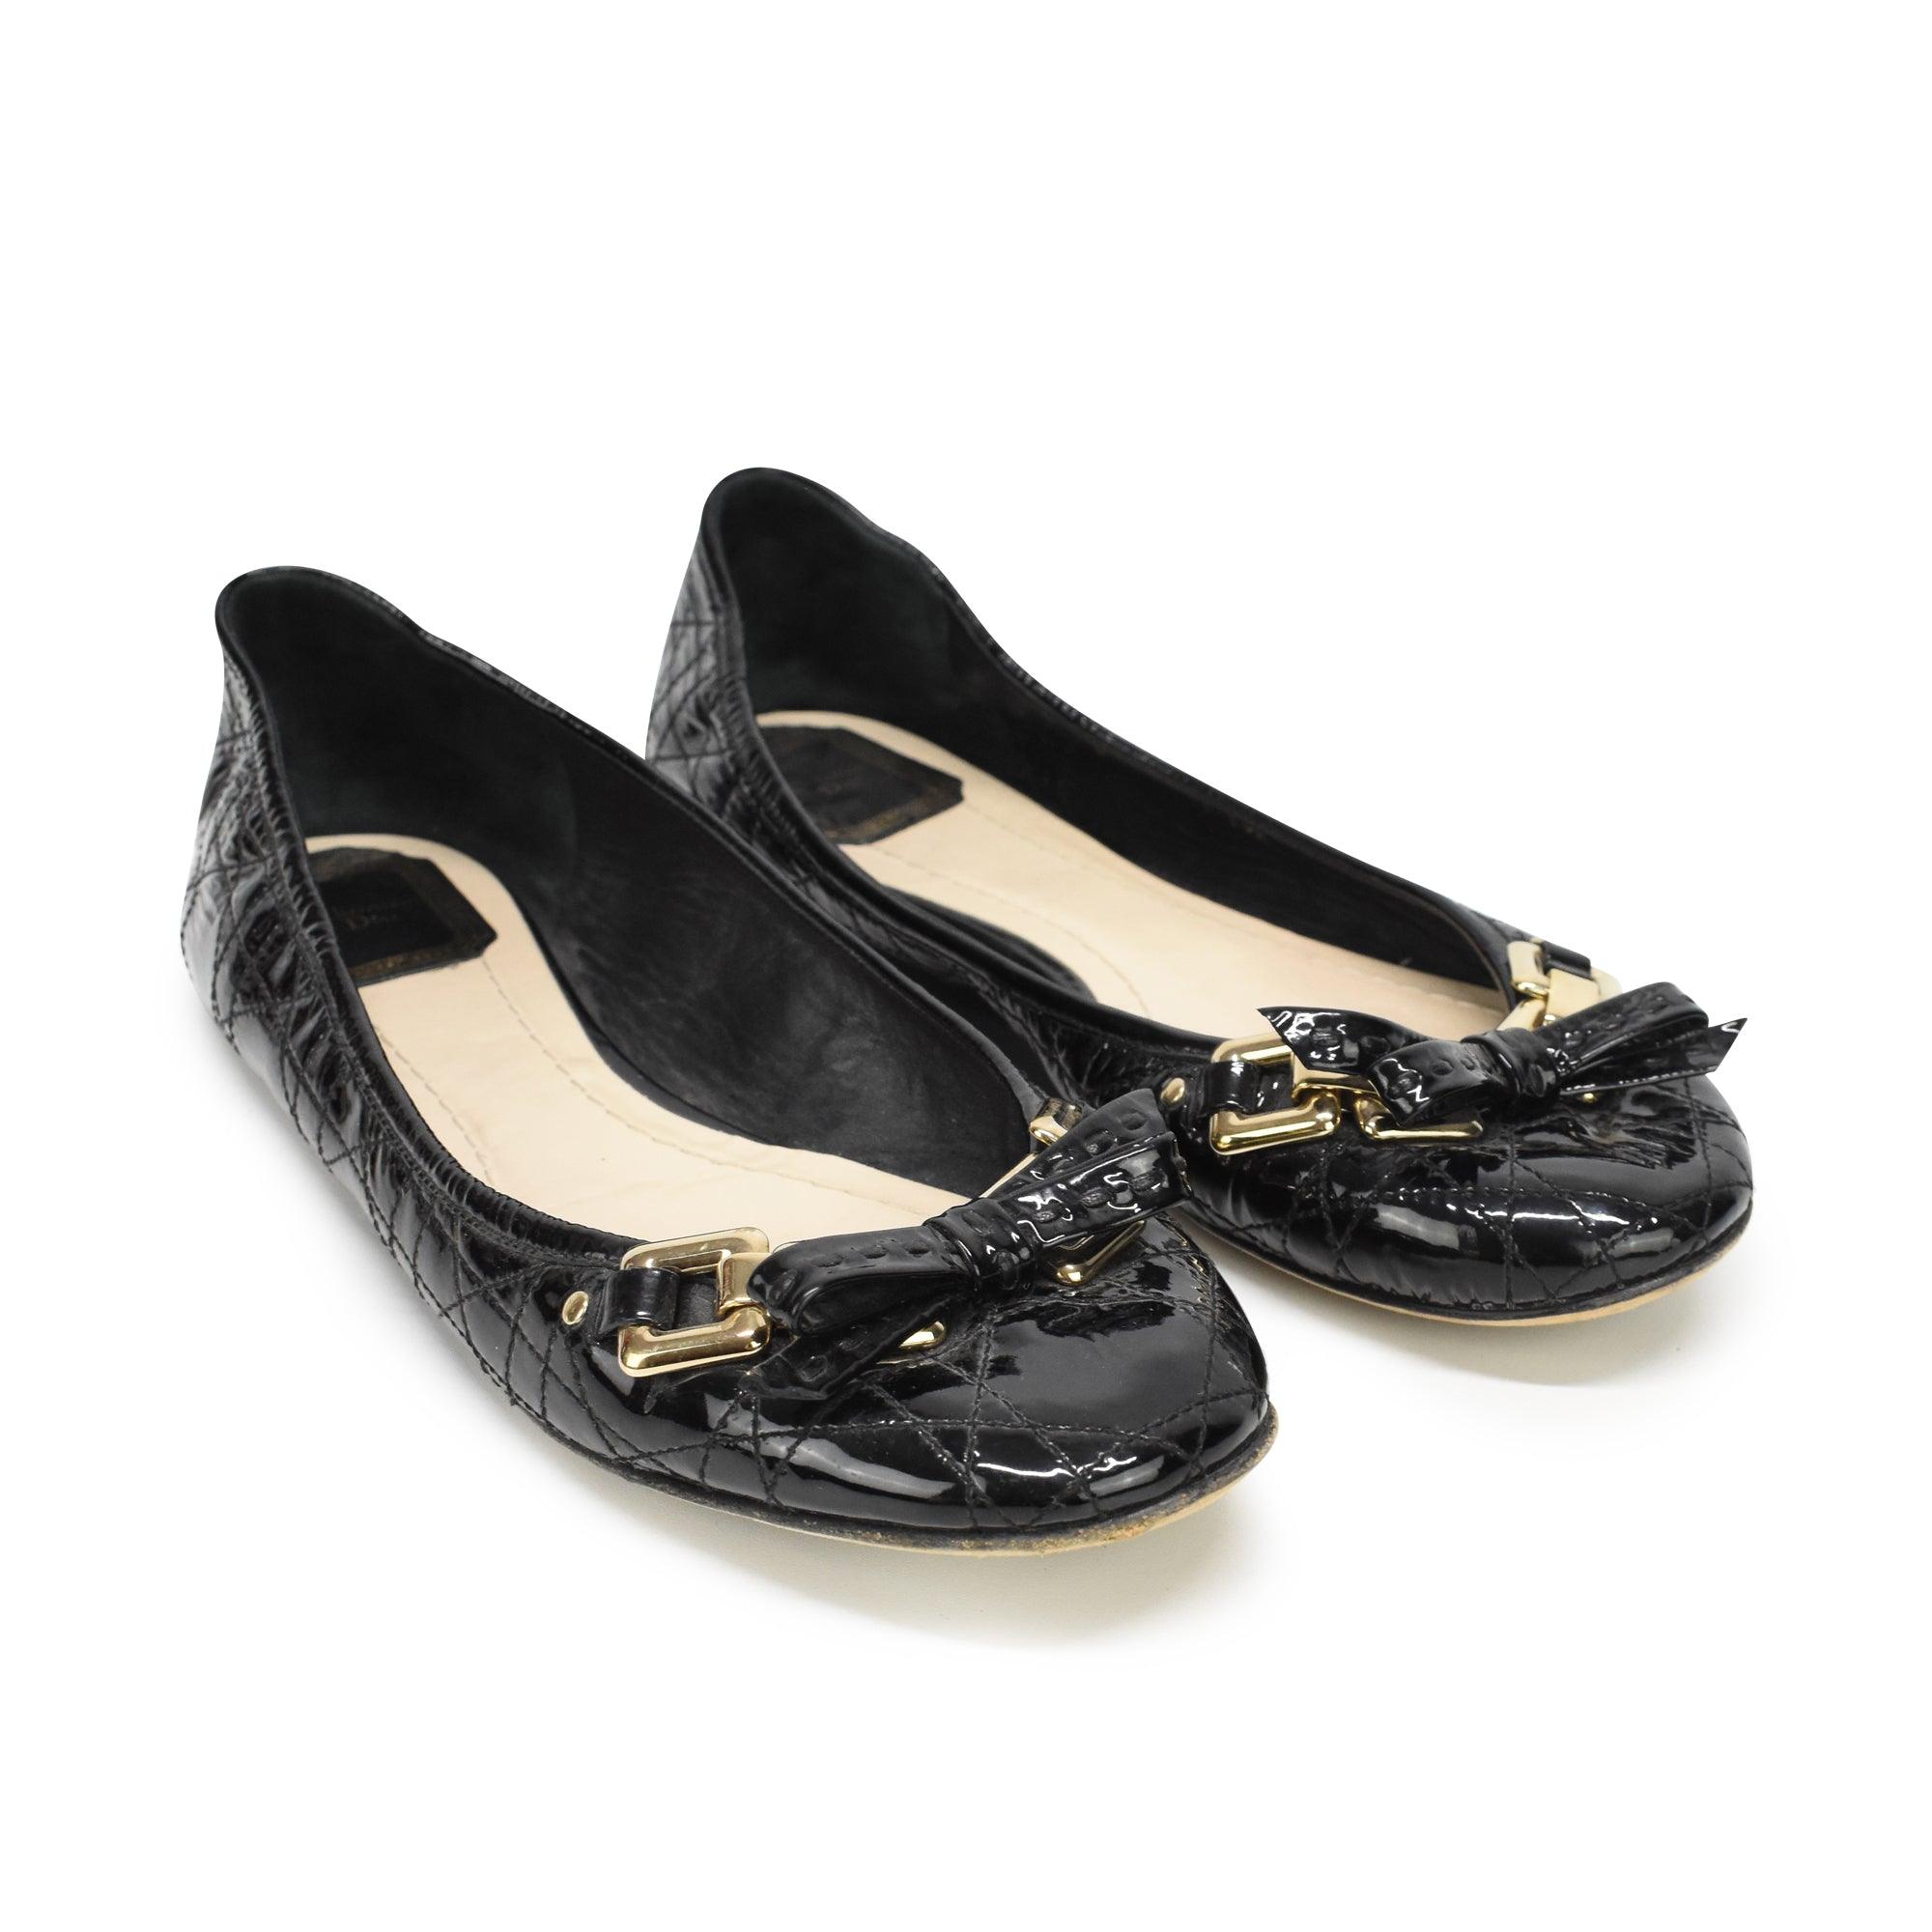 Dior Flats - Women's 39.5 - Fashionably Yours